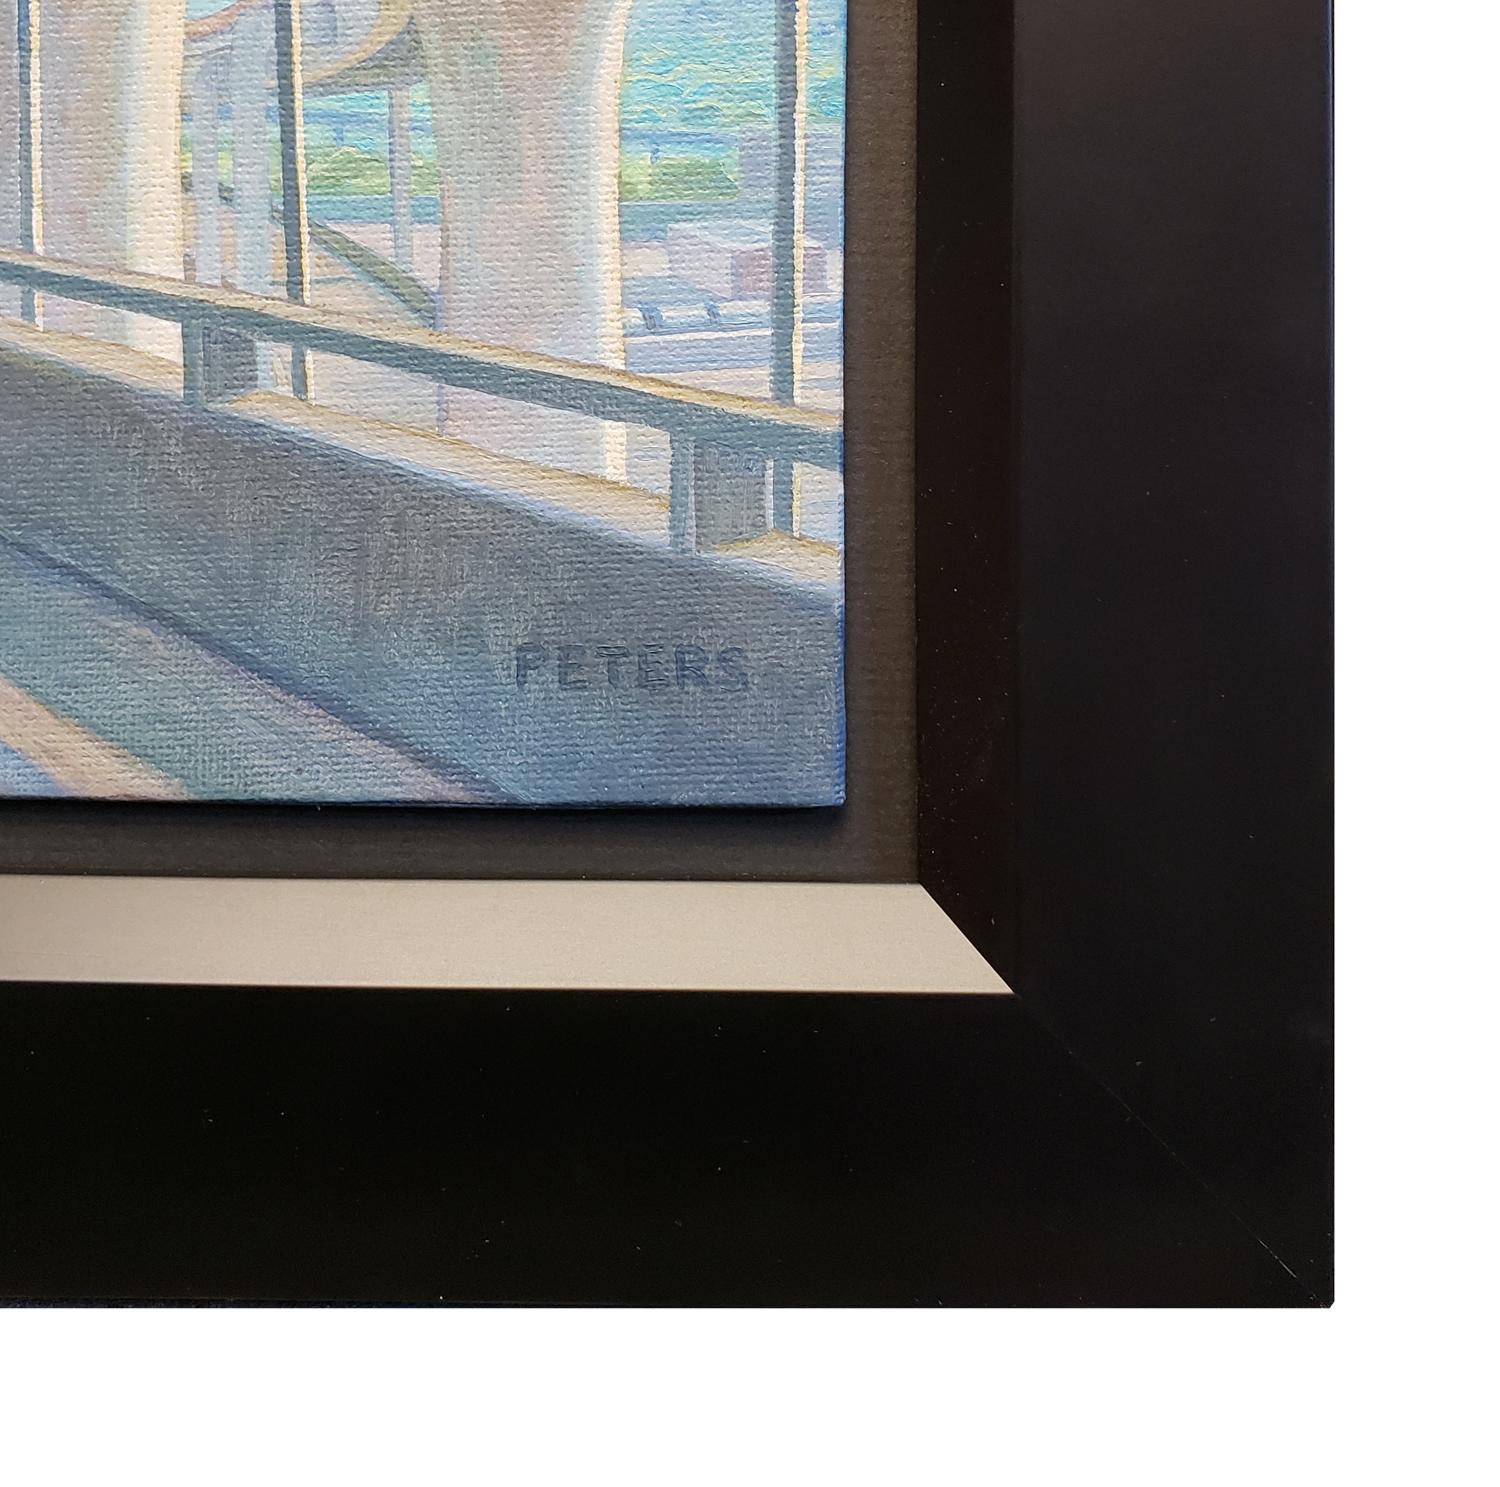 Overpass; Portland, Oregon - Realist Painting by Tony Peters